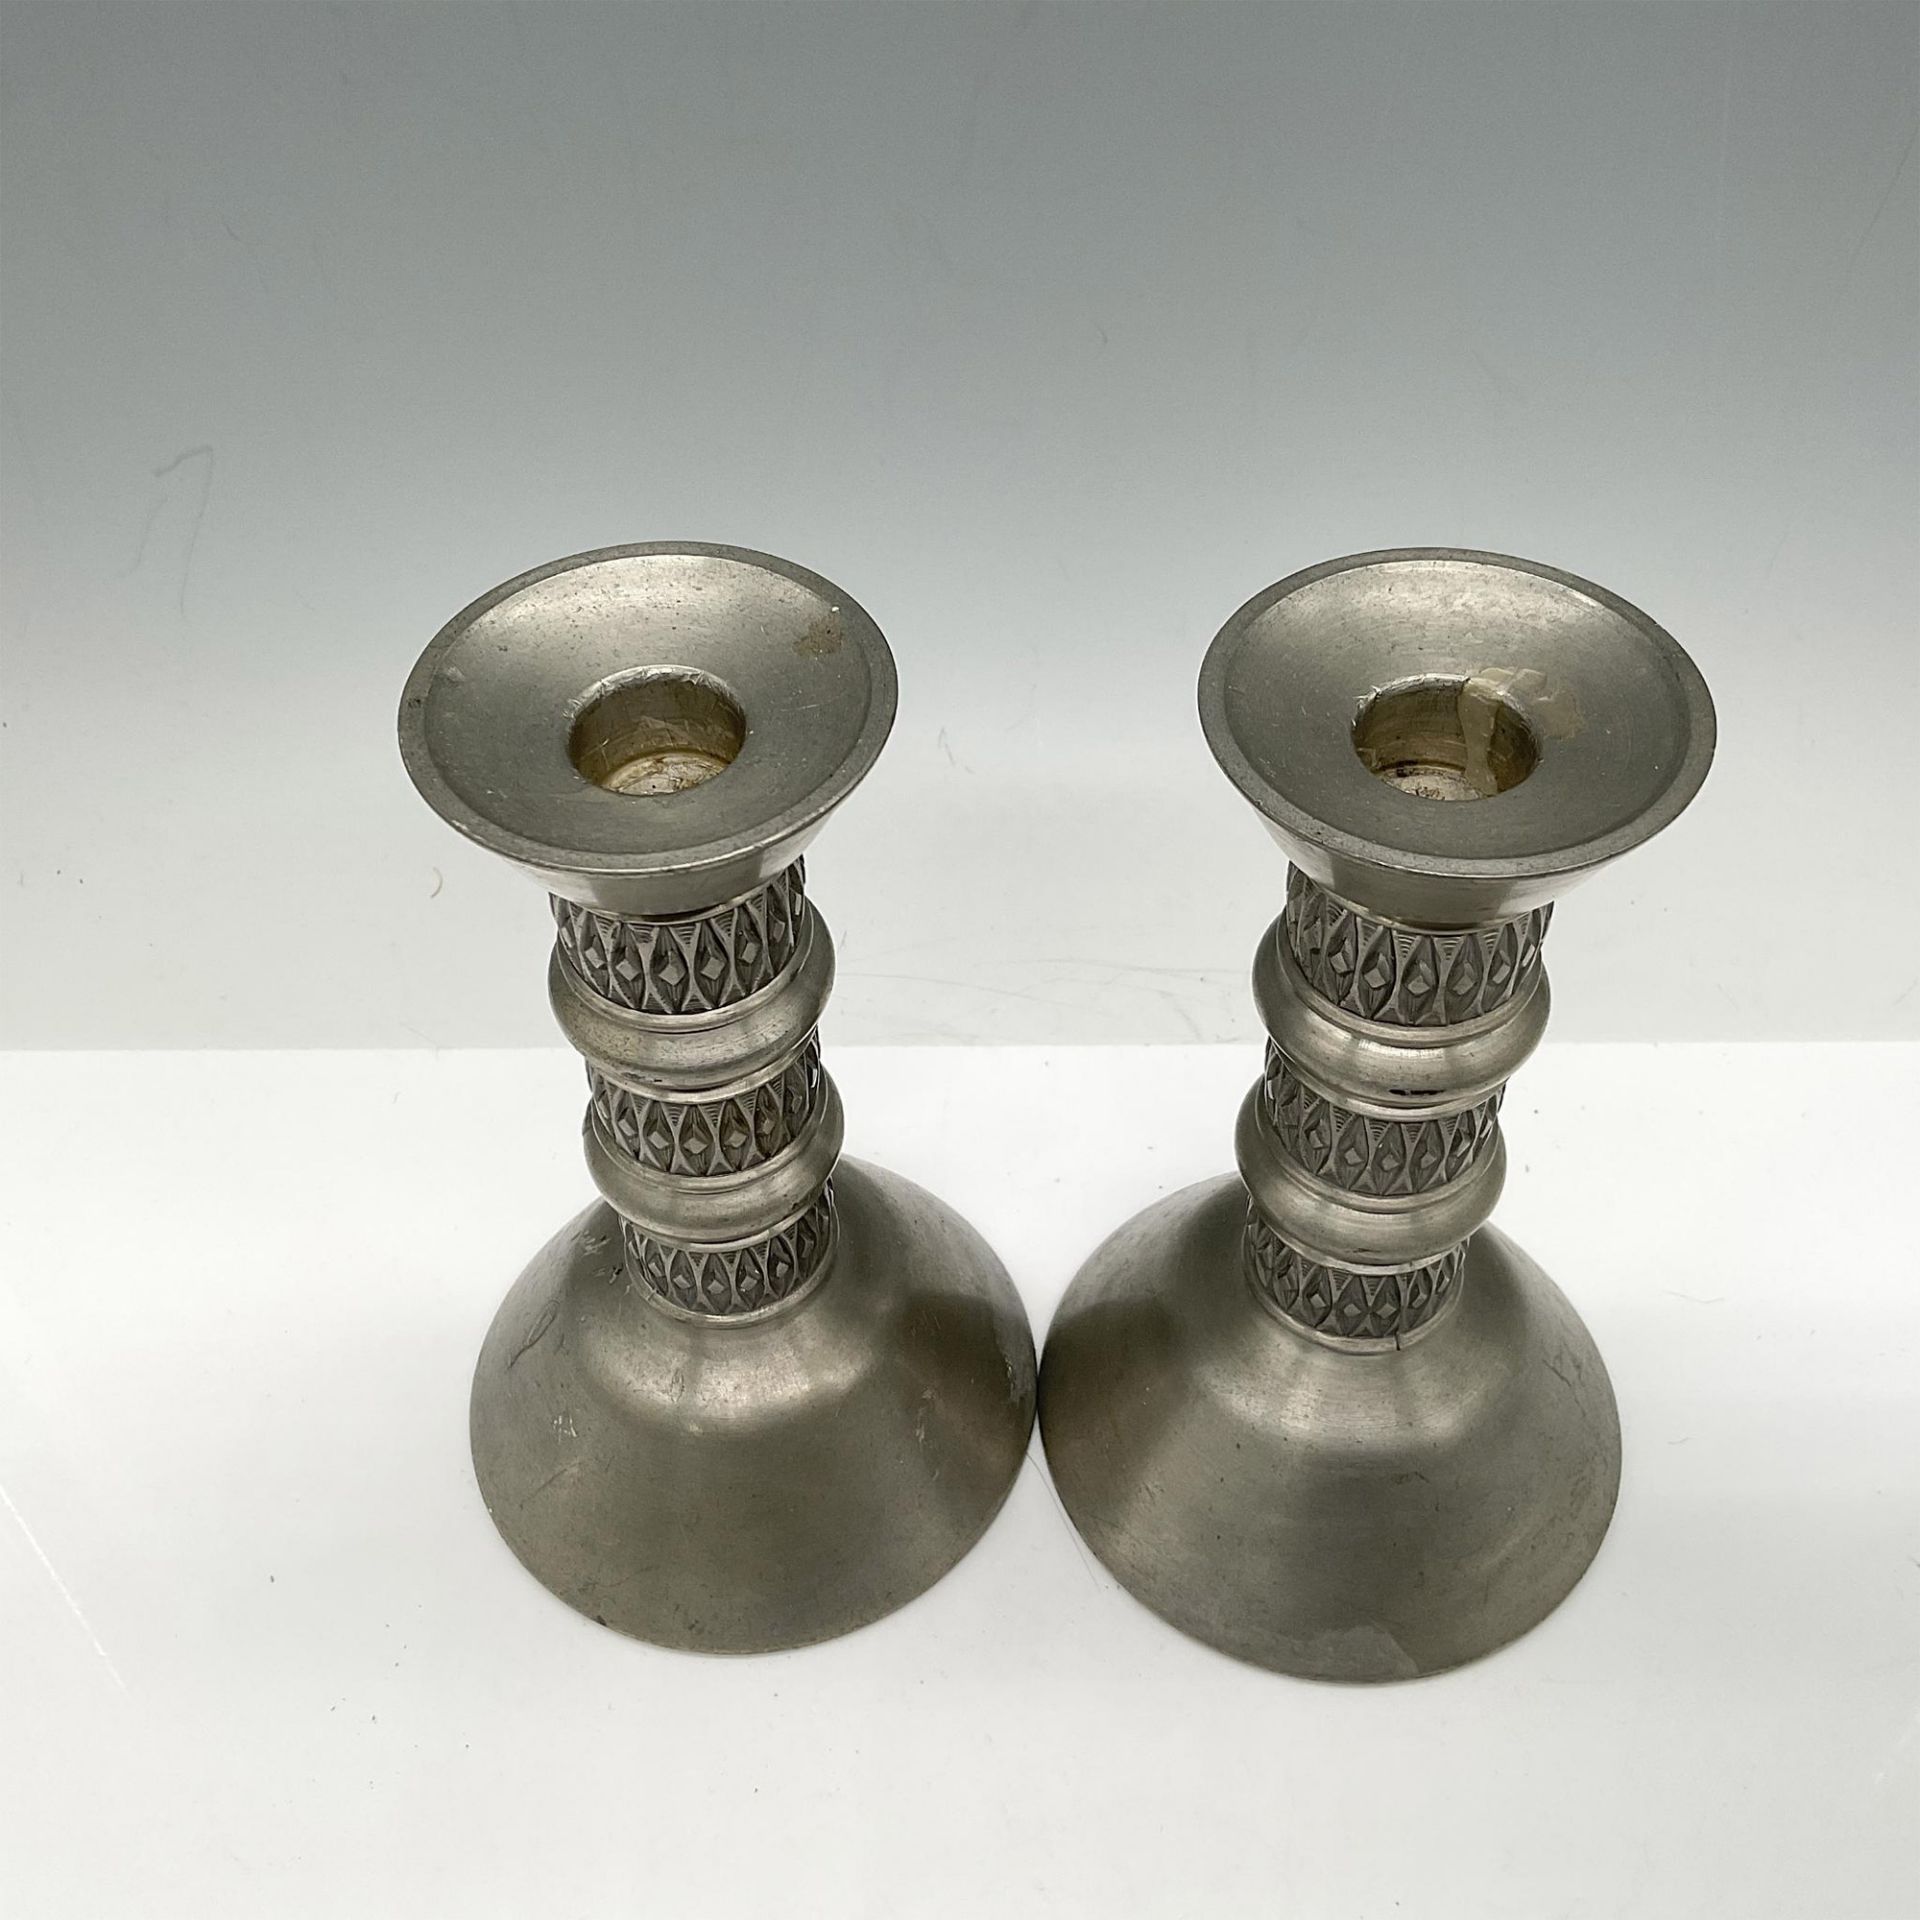 Pair of Amistad Pewter Candlestick Holders - Image 2 of 3